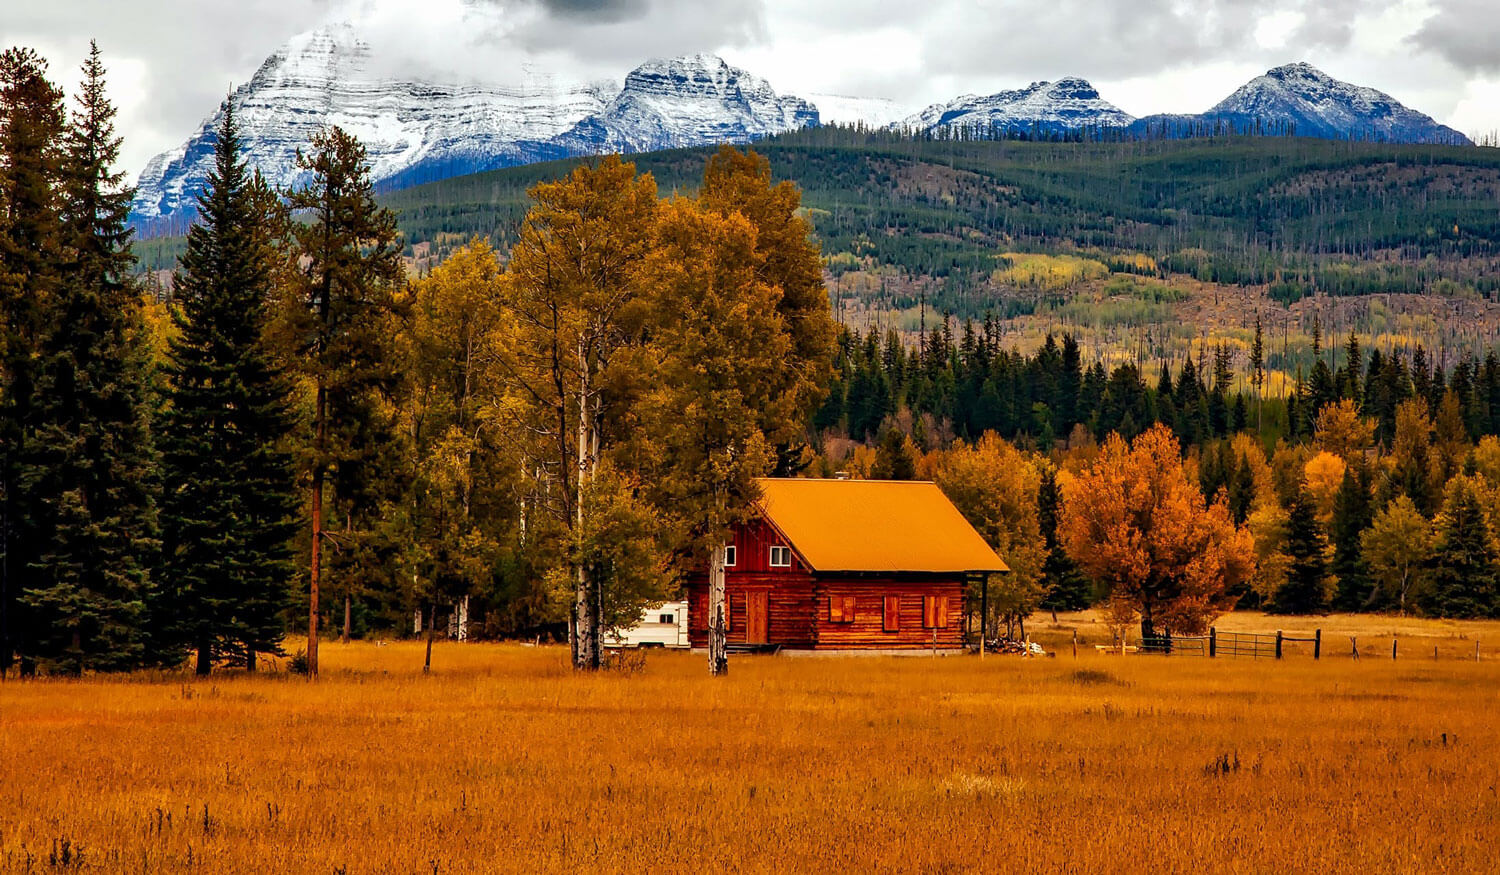 A log cabin nestled in a meadow, with the majestic peaks of the Rocky Mountains towering in the distance